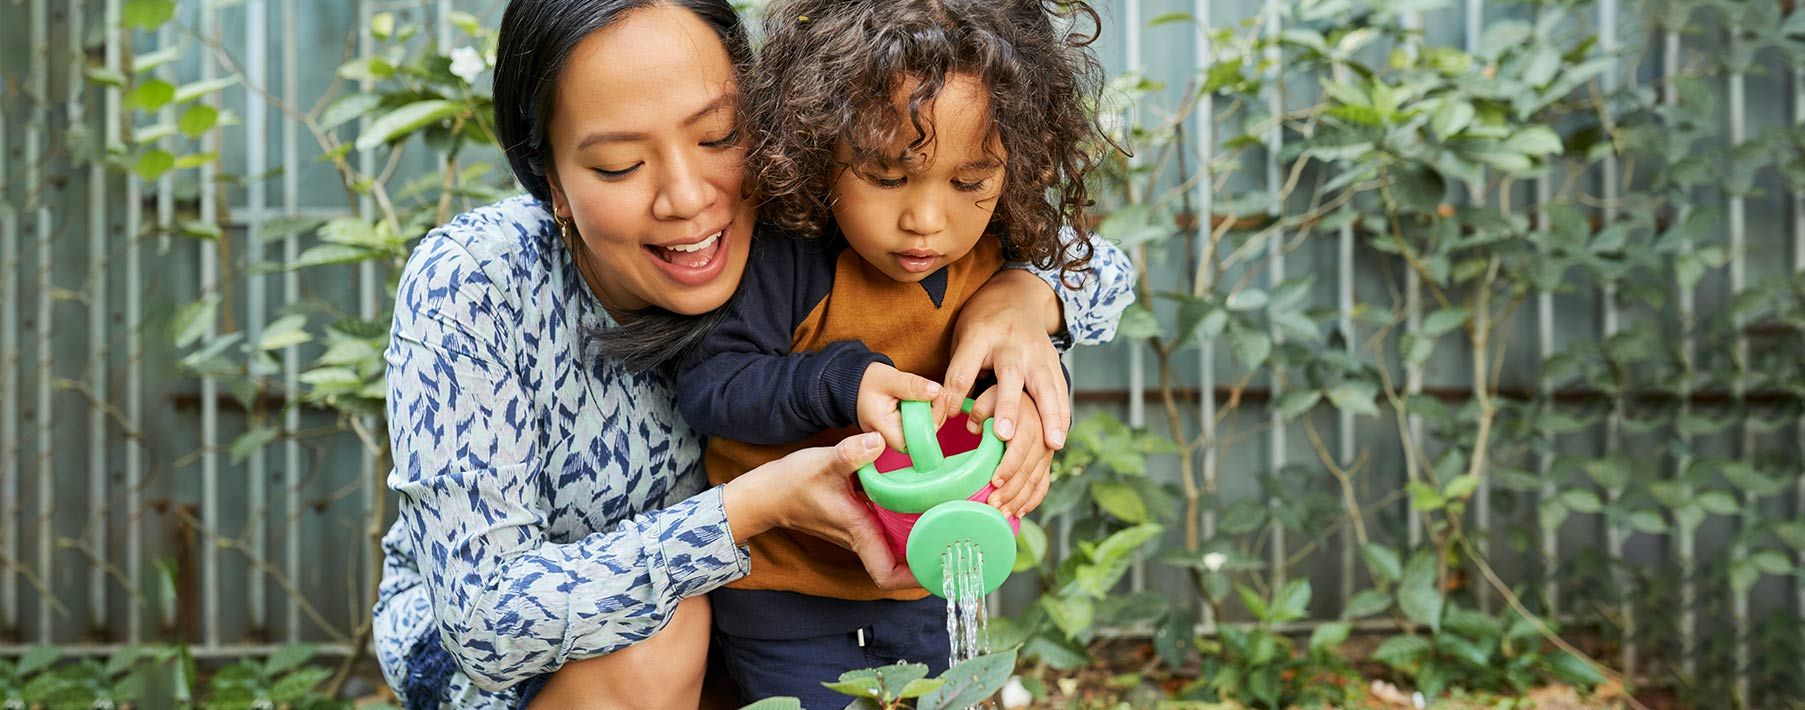 A woman and a young boy watering a plant with a toy watering can